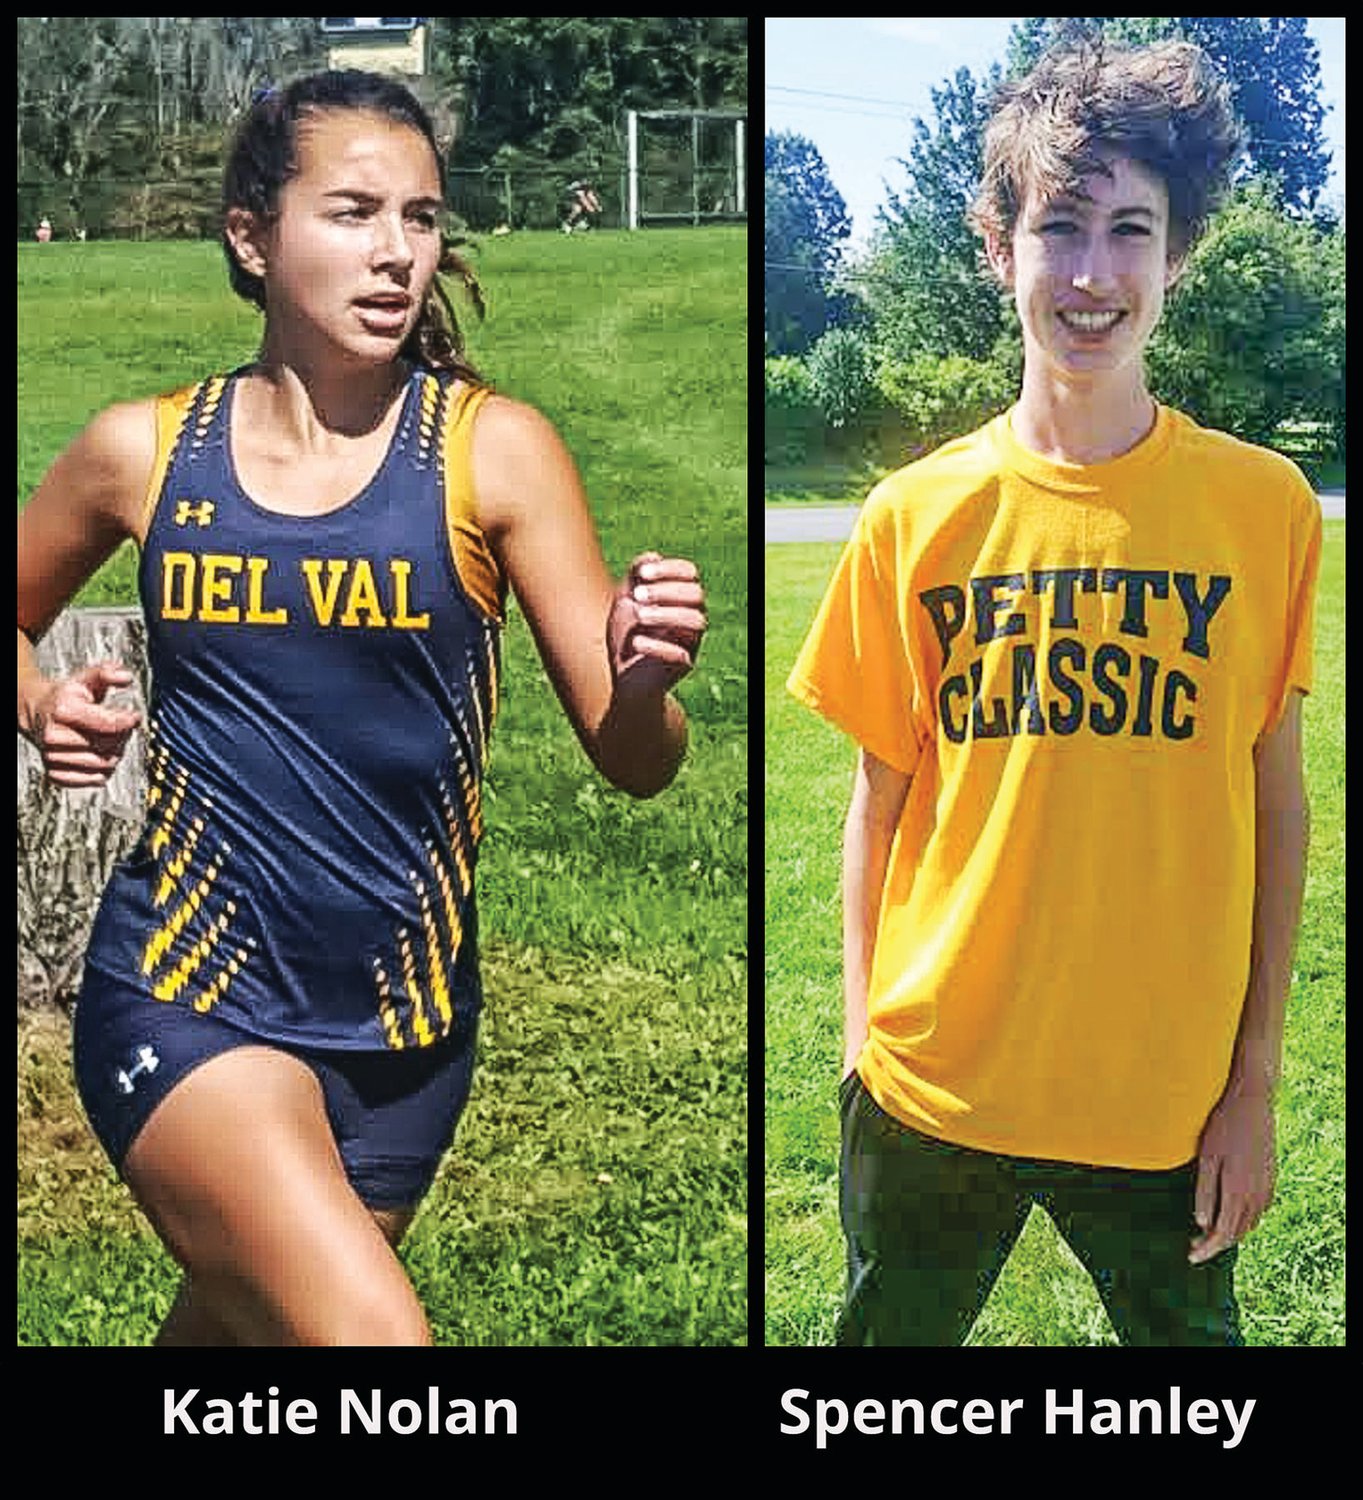 Del Val High School’s Katie Nolan (20:52) and Spencer Hanley (17:47) were the girls and boys winners of the 28th annual Petty Run.